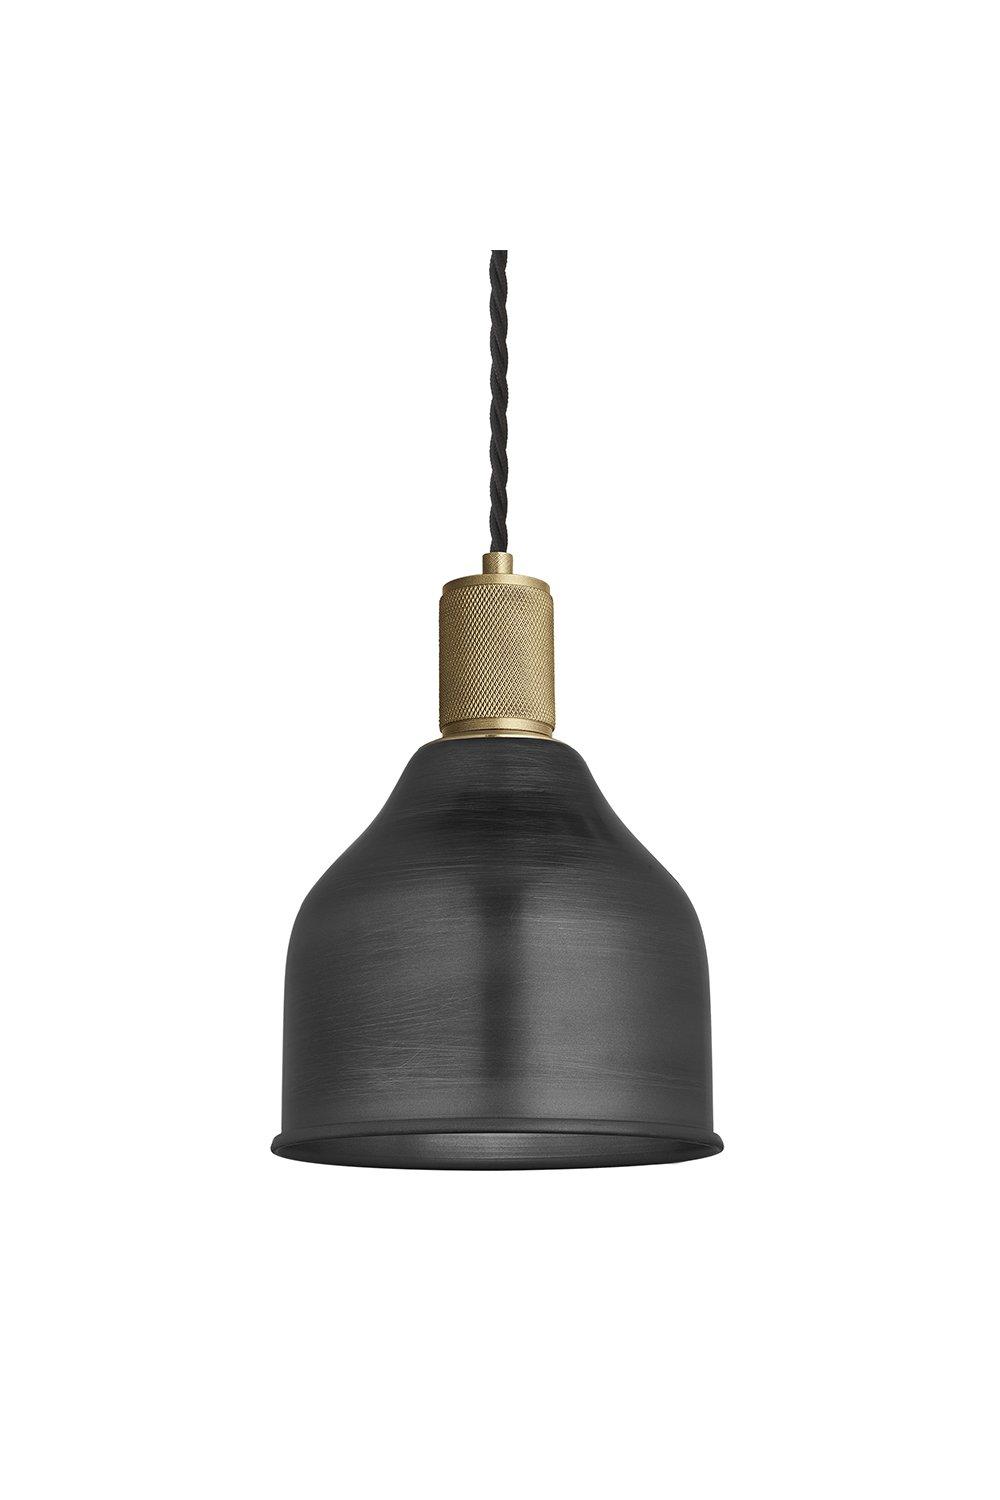 Knurled Cone Pendant Light, 7 Inch, Pewter, Brass Holder